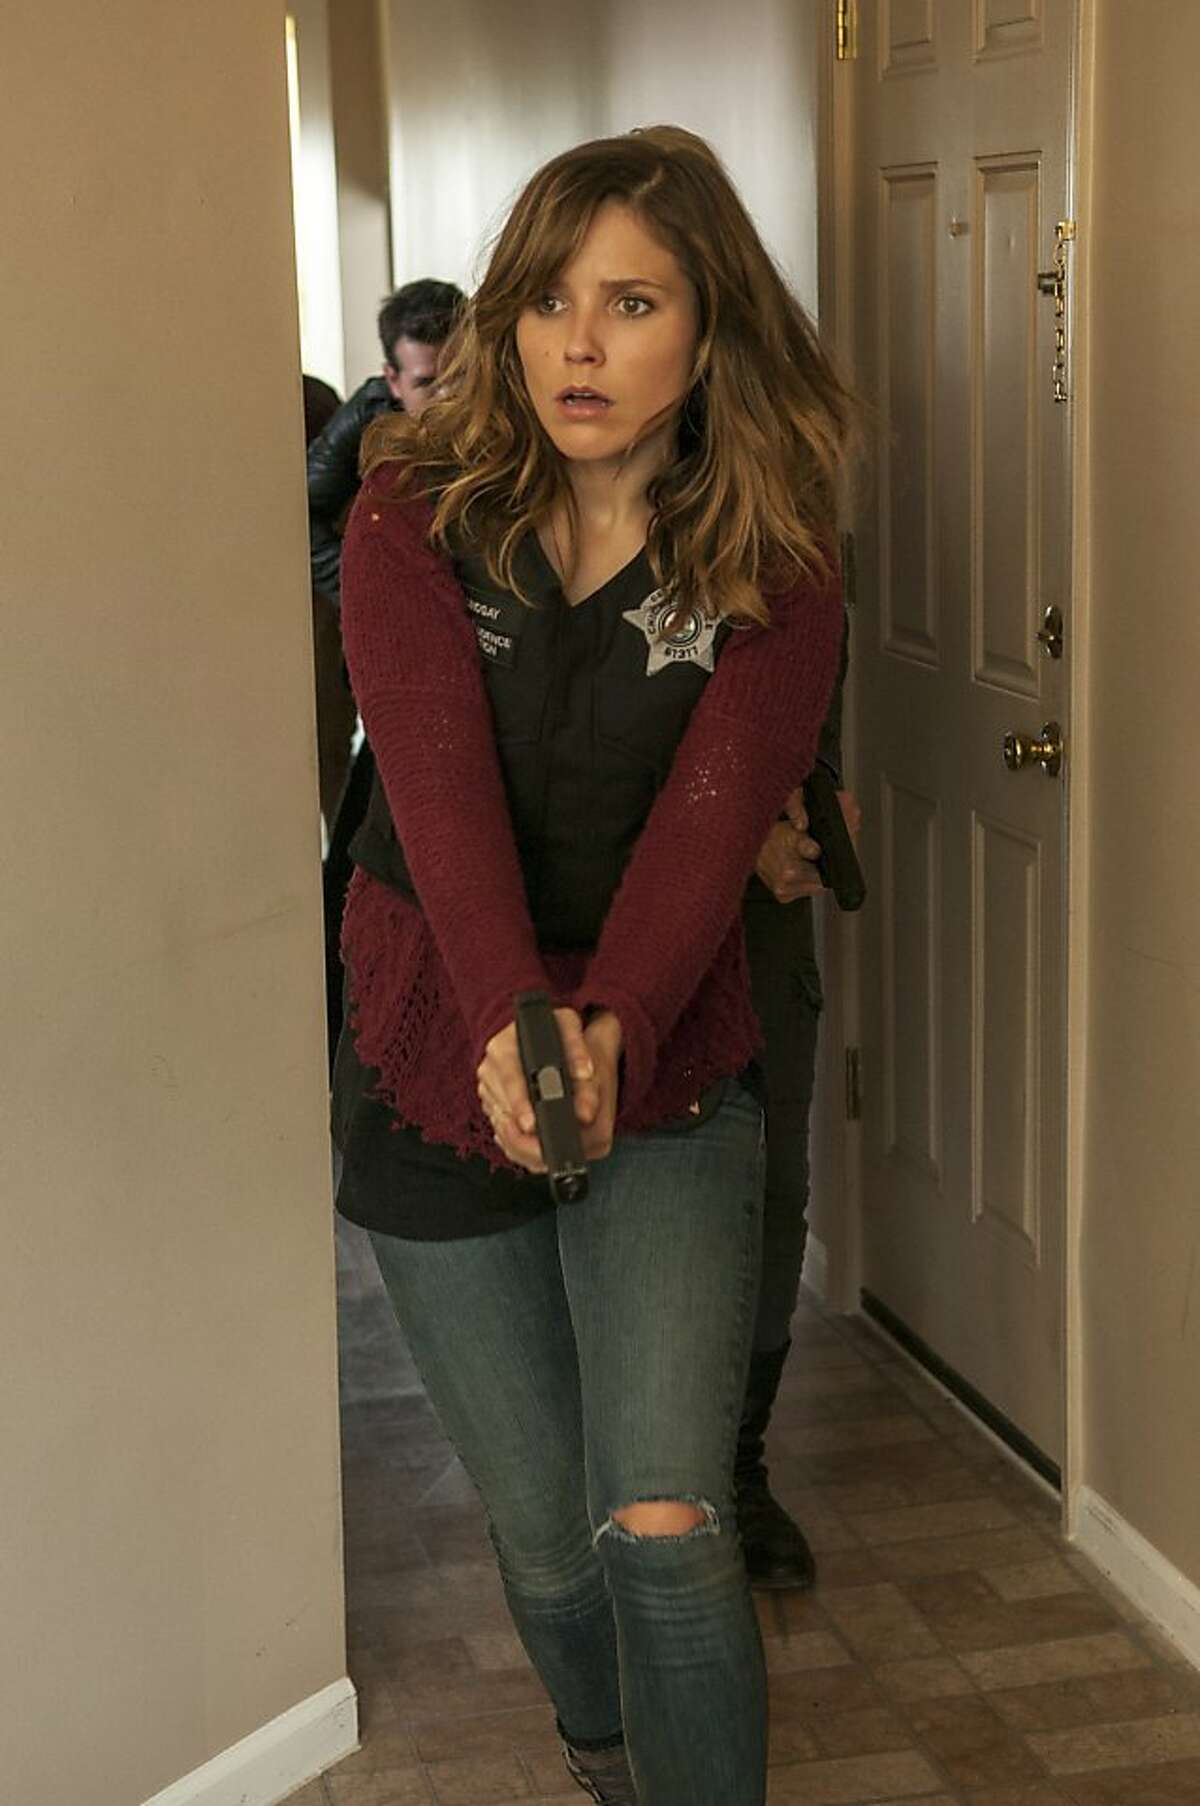 CHICAGO P.D. -- "Stepping Stone" Episode 101 -- Pictured: Sophia Bush as Det. Erin Lindsay -- (Photo by: Matt Dinerstein/NBC) CHICAGO P.D. -- "Stepping Stone" Episode 101 -- Pictured: Sophia Bush as Det. Erin Lindsay -- (Photo by: Matt Dinerstein/NBC)